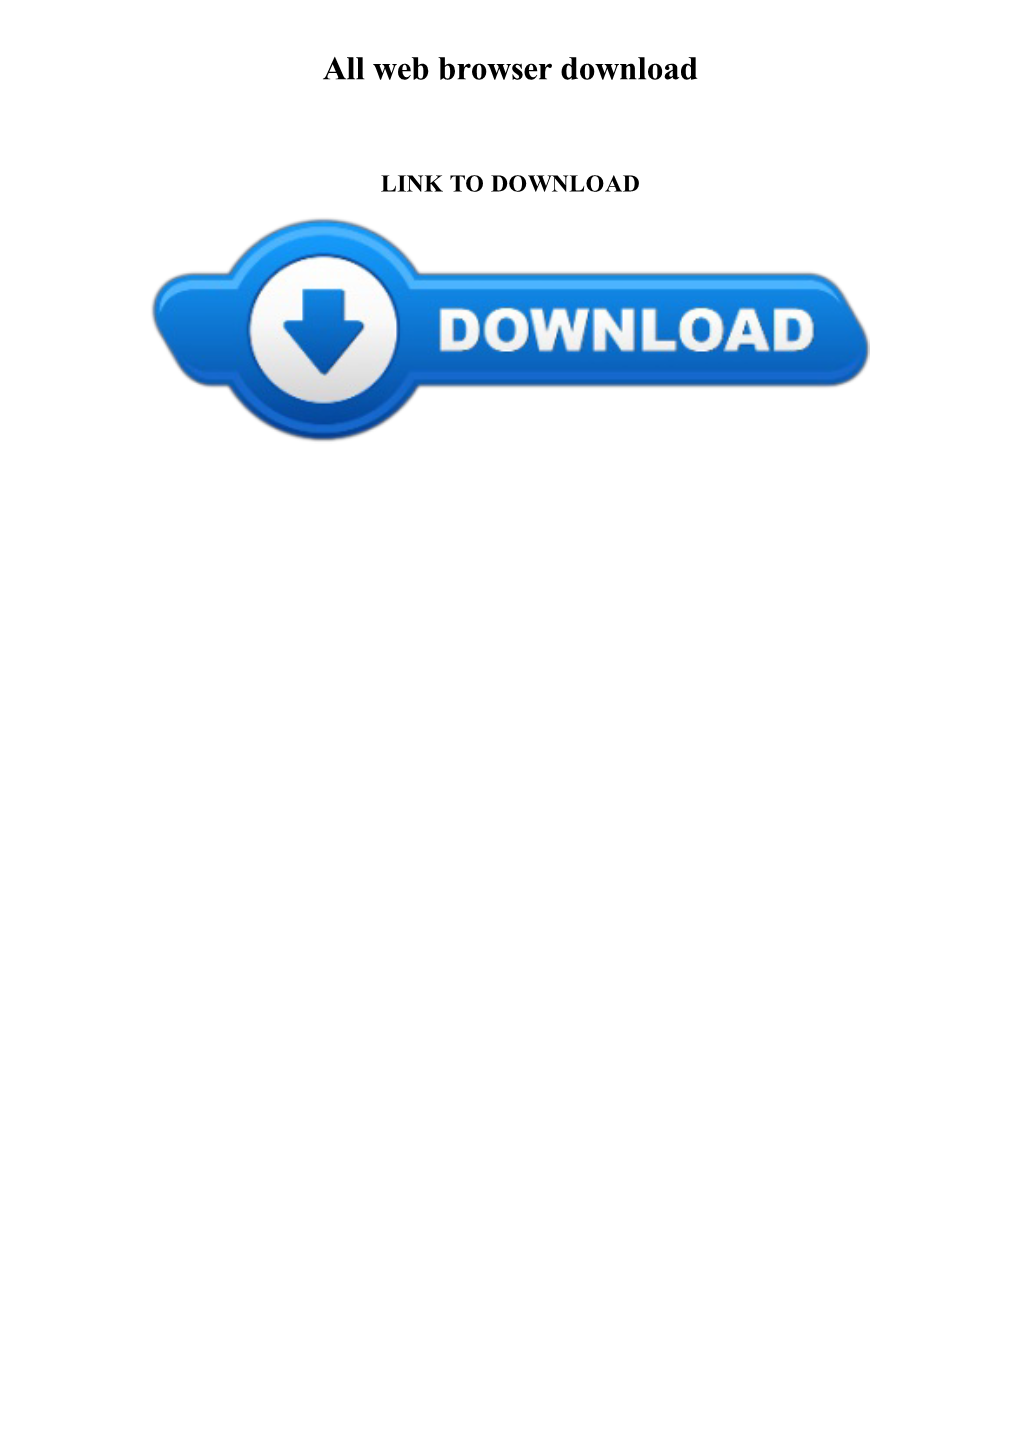 All Web Browser Download